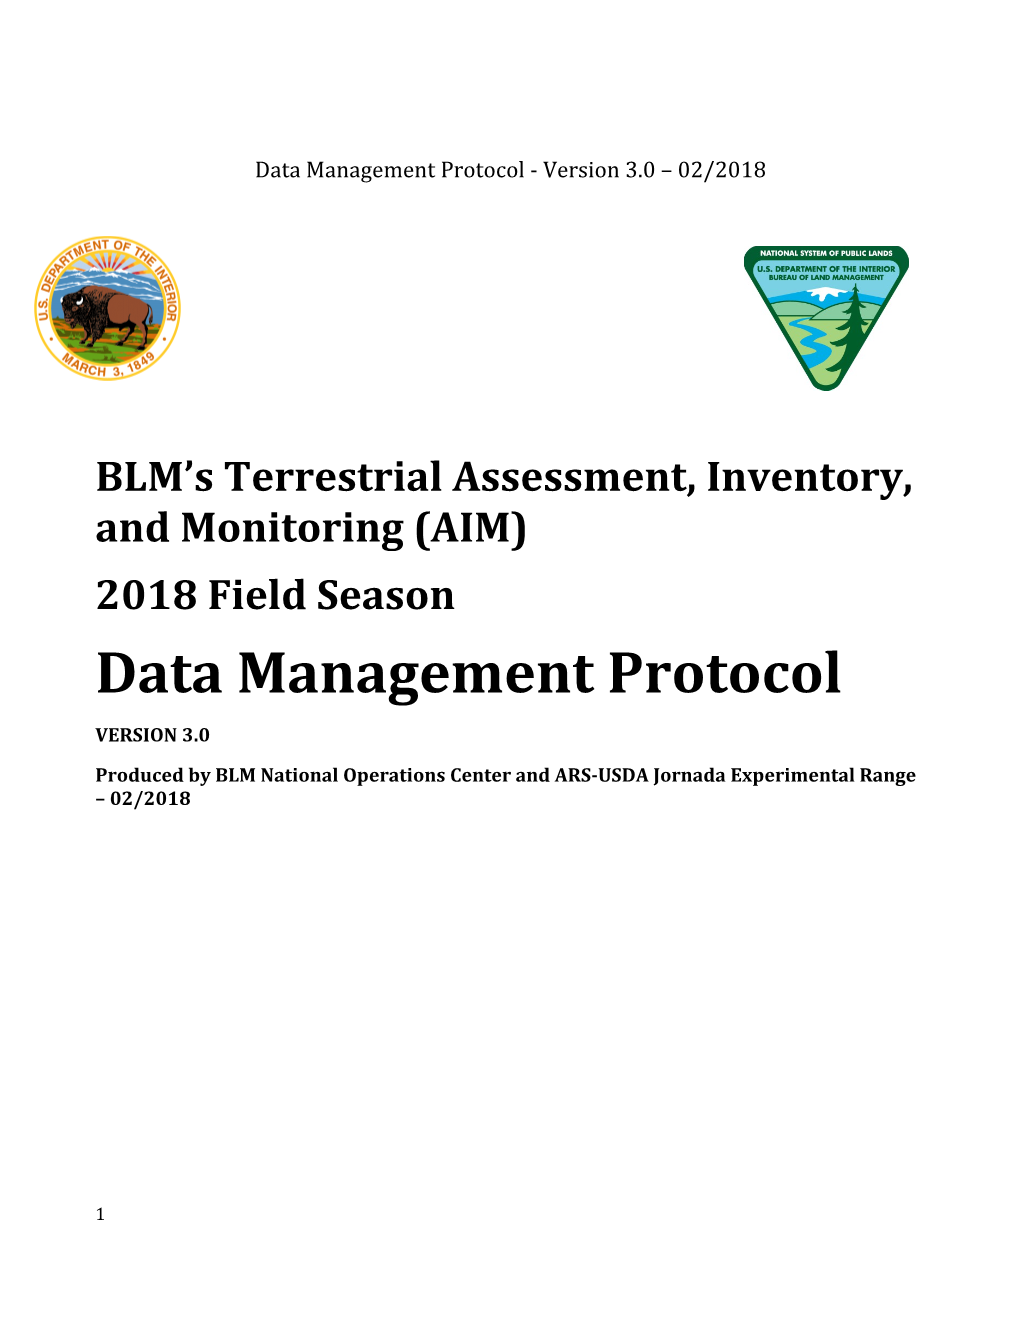 BLM S Terrestrial Assessment, Inventory, and Monitoring (AIM)